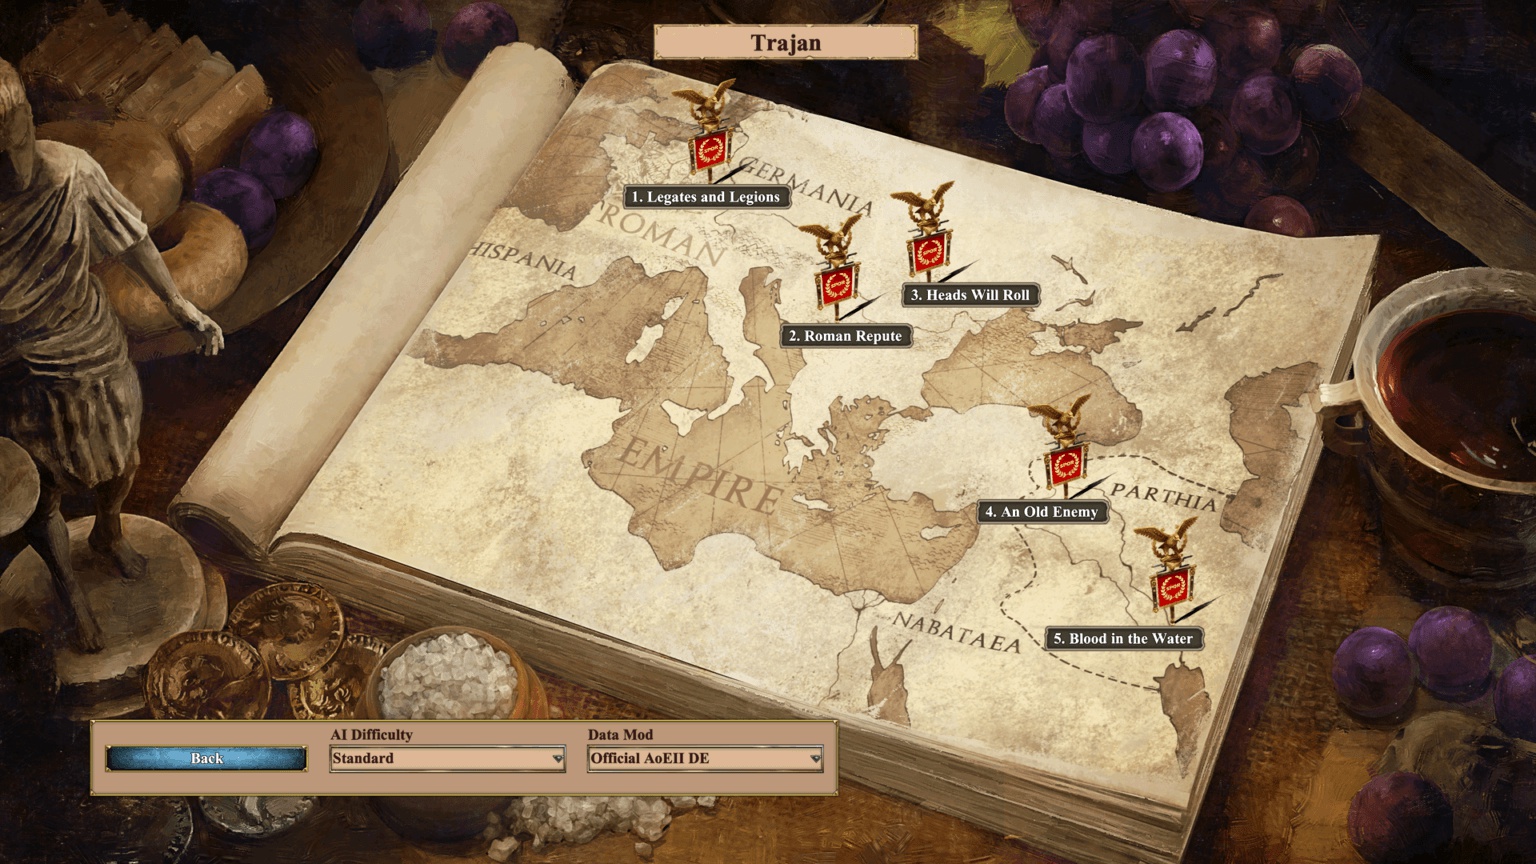 DLC age of Empires 2 Definitive Edition. Eastern Traian campaign Map. Age of Empires 2 Return to Rome. Hour age